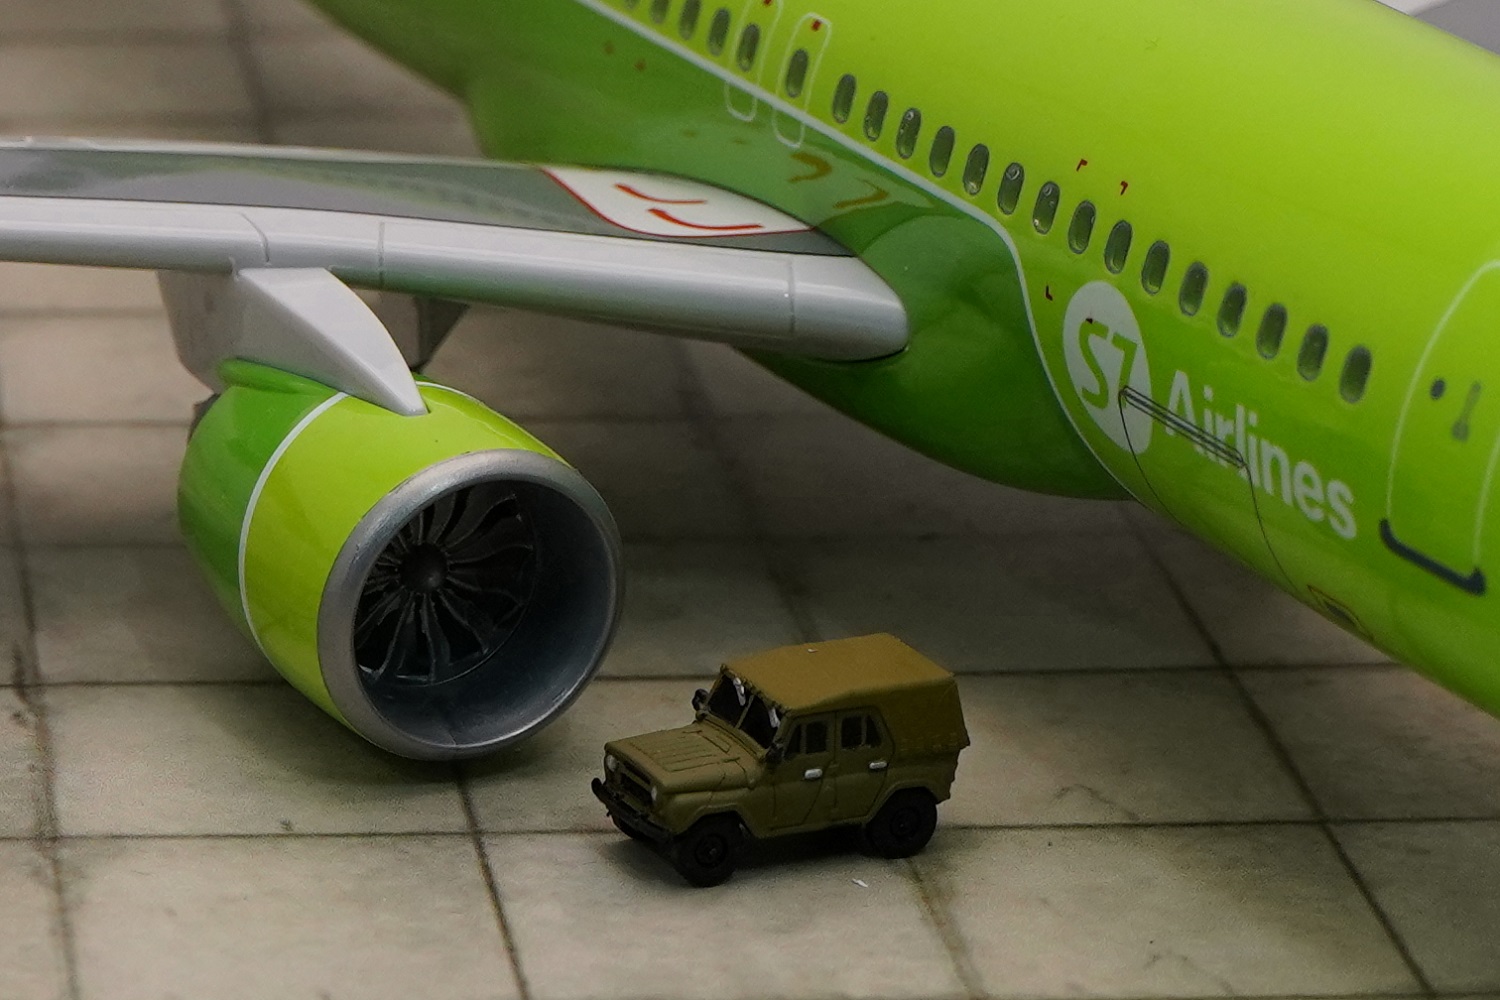   Airbus A320 Neo,  S7 Airlines .    .  # 13 hobbyplus.ru